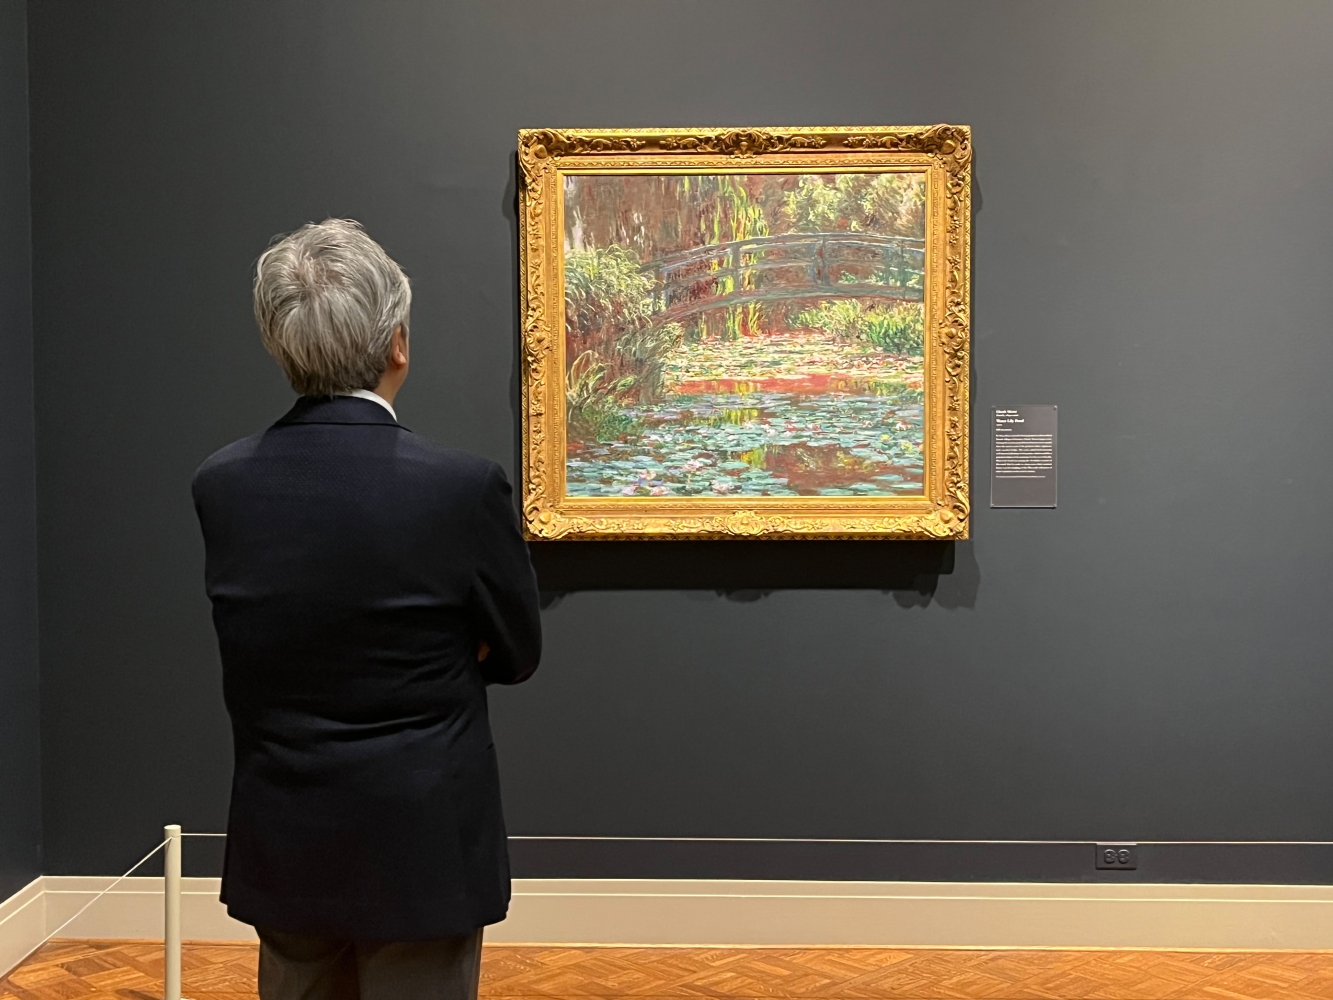 The Art Institute of Chicago is also famous for its world-class collection of Impressionists.&nbsp;I was overwhelmed by Monet&rsquo;s works. It will take months to see the works in the Museum, which include Van Gogh&rsquo;s &ldquo;The Bedroom&rdquo;, Cezanne&rsquo;s still life &ldquo;The basket of Apples&quot;.